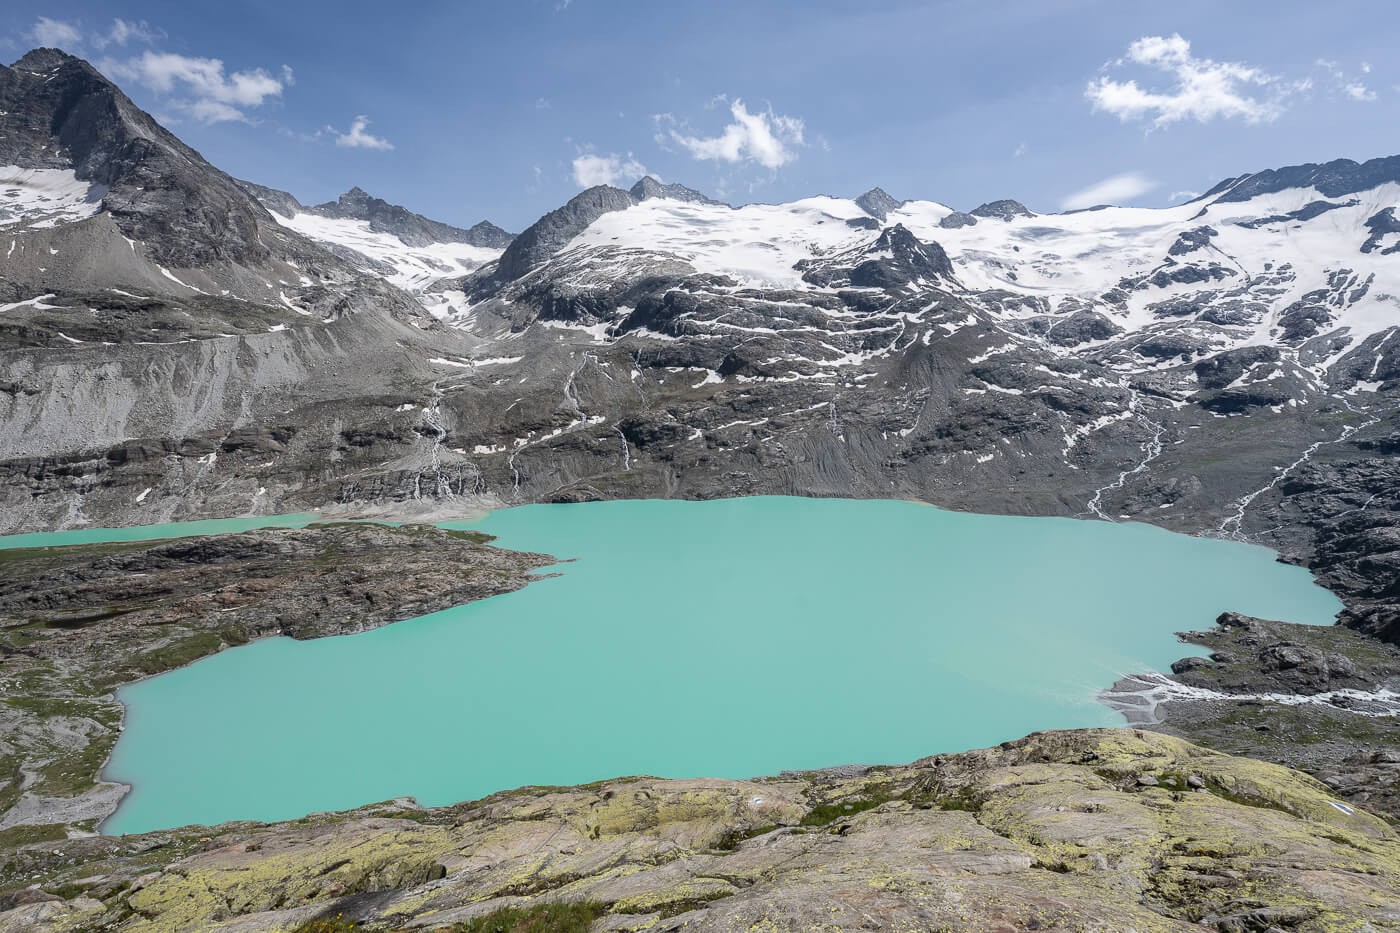 Gaulisee a deep turquoise alpine lake surrounded by mountains with glaciers on a hike from Mattenalpsee